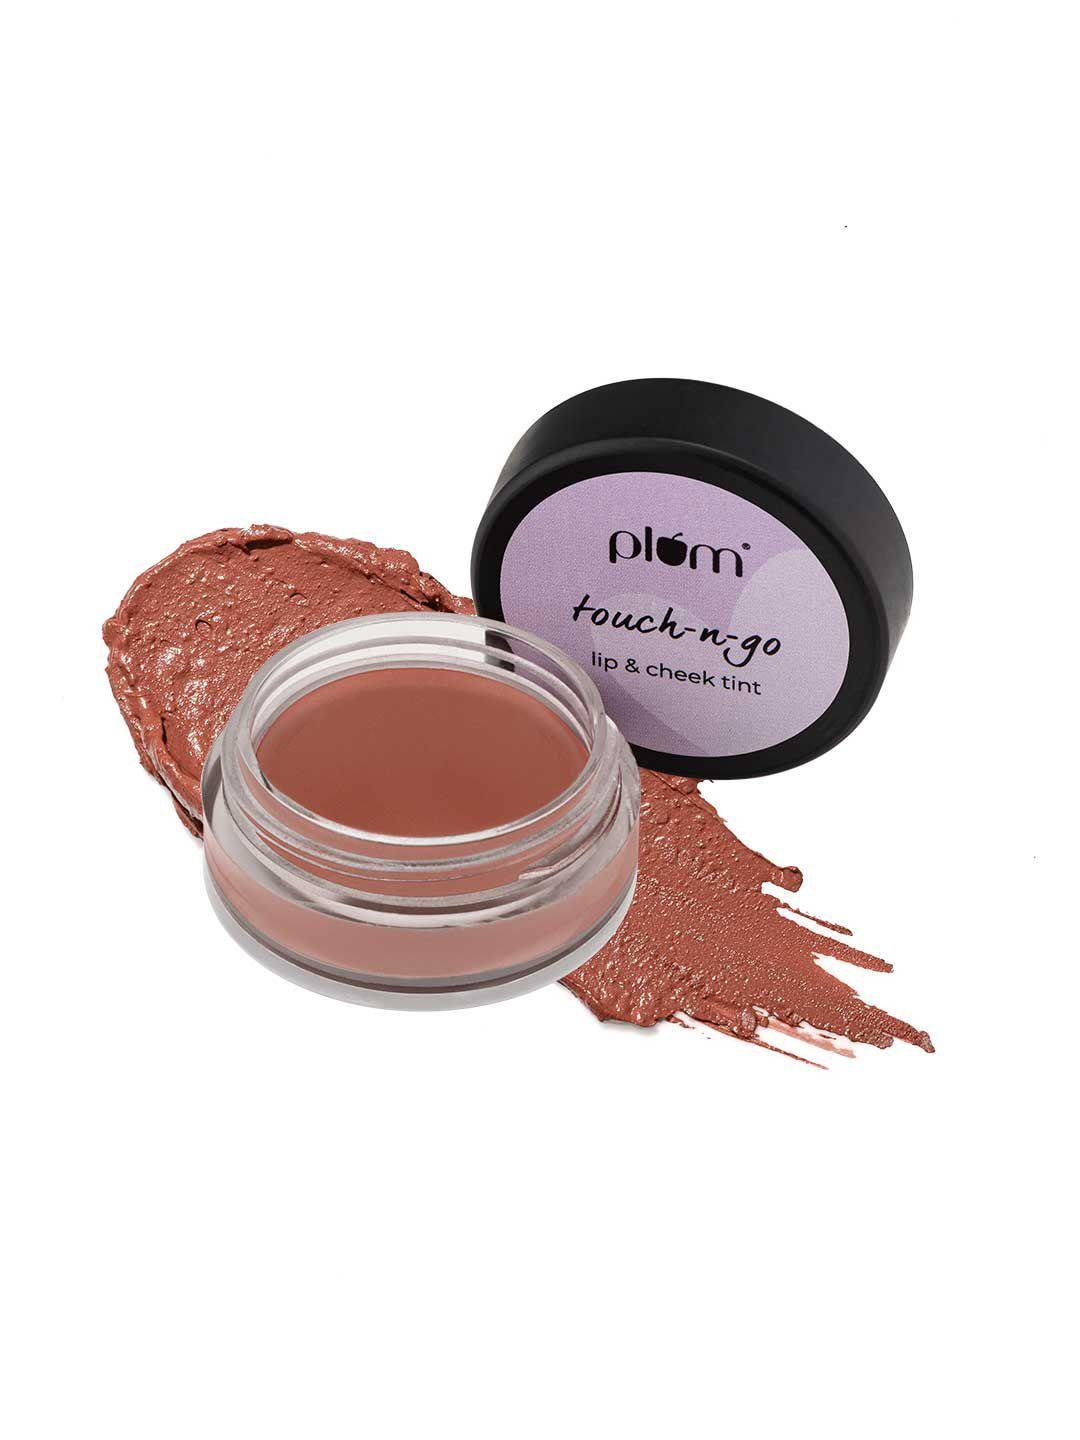 plum touch-n-go lip & cheek tint with jojoba oil & shea butter 6 g - pinched nude 126